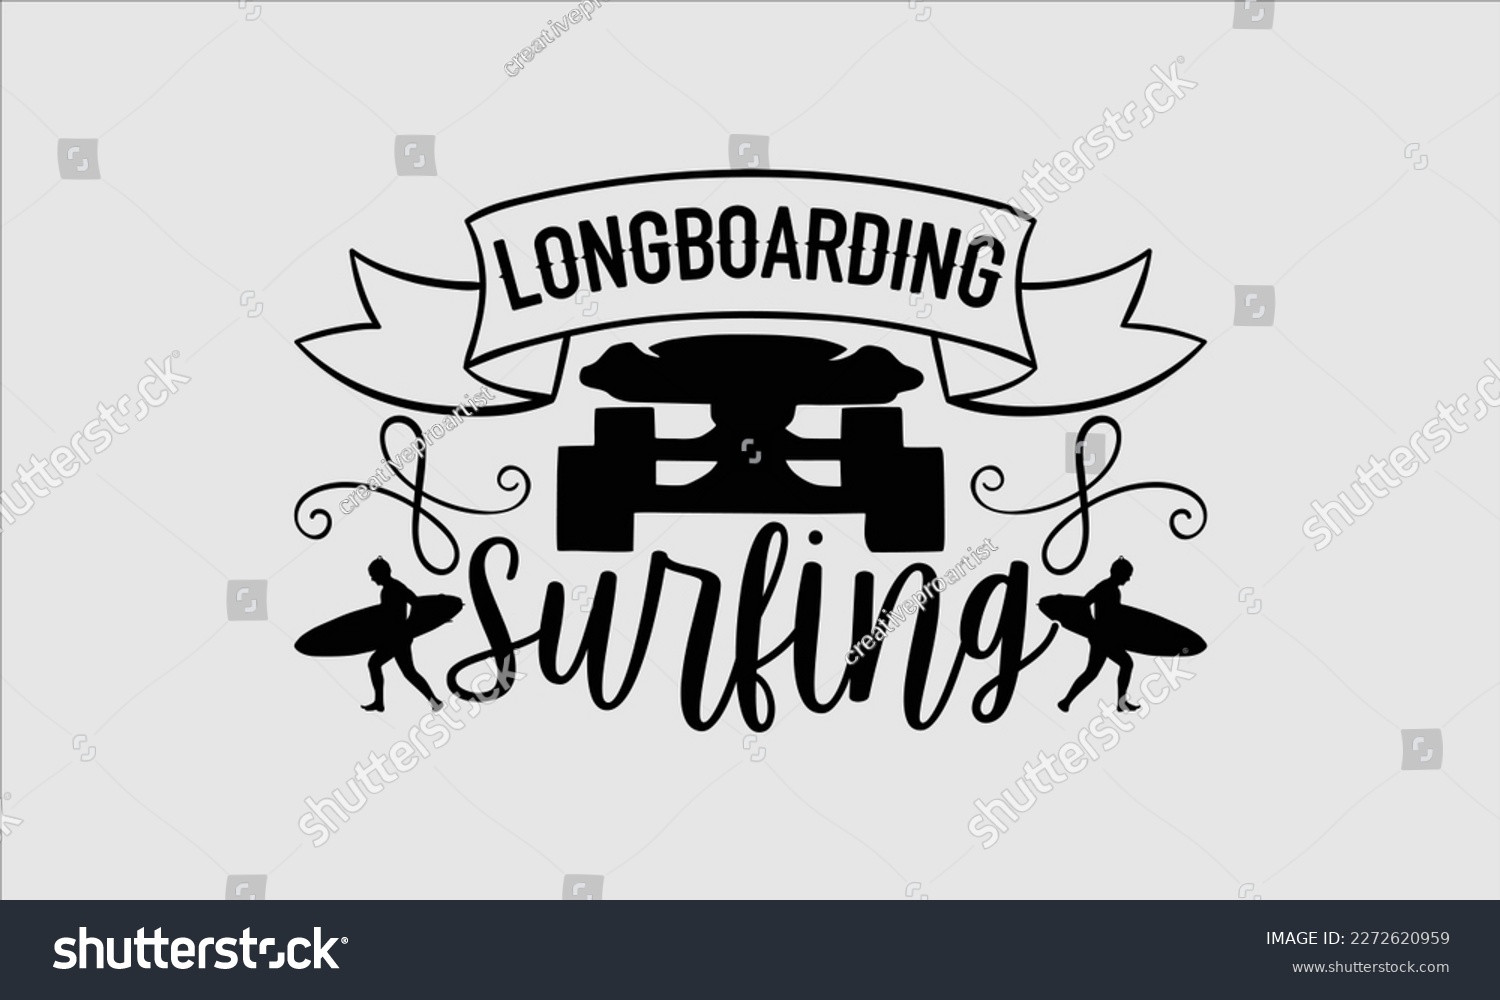 SVG of Longboarding surfing- Longboarding T- shirt Design, Hand drawn lettering phrase, Illustration for prints on t-shirts and bags, posters, funny eps files, svg cricut svg